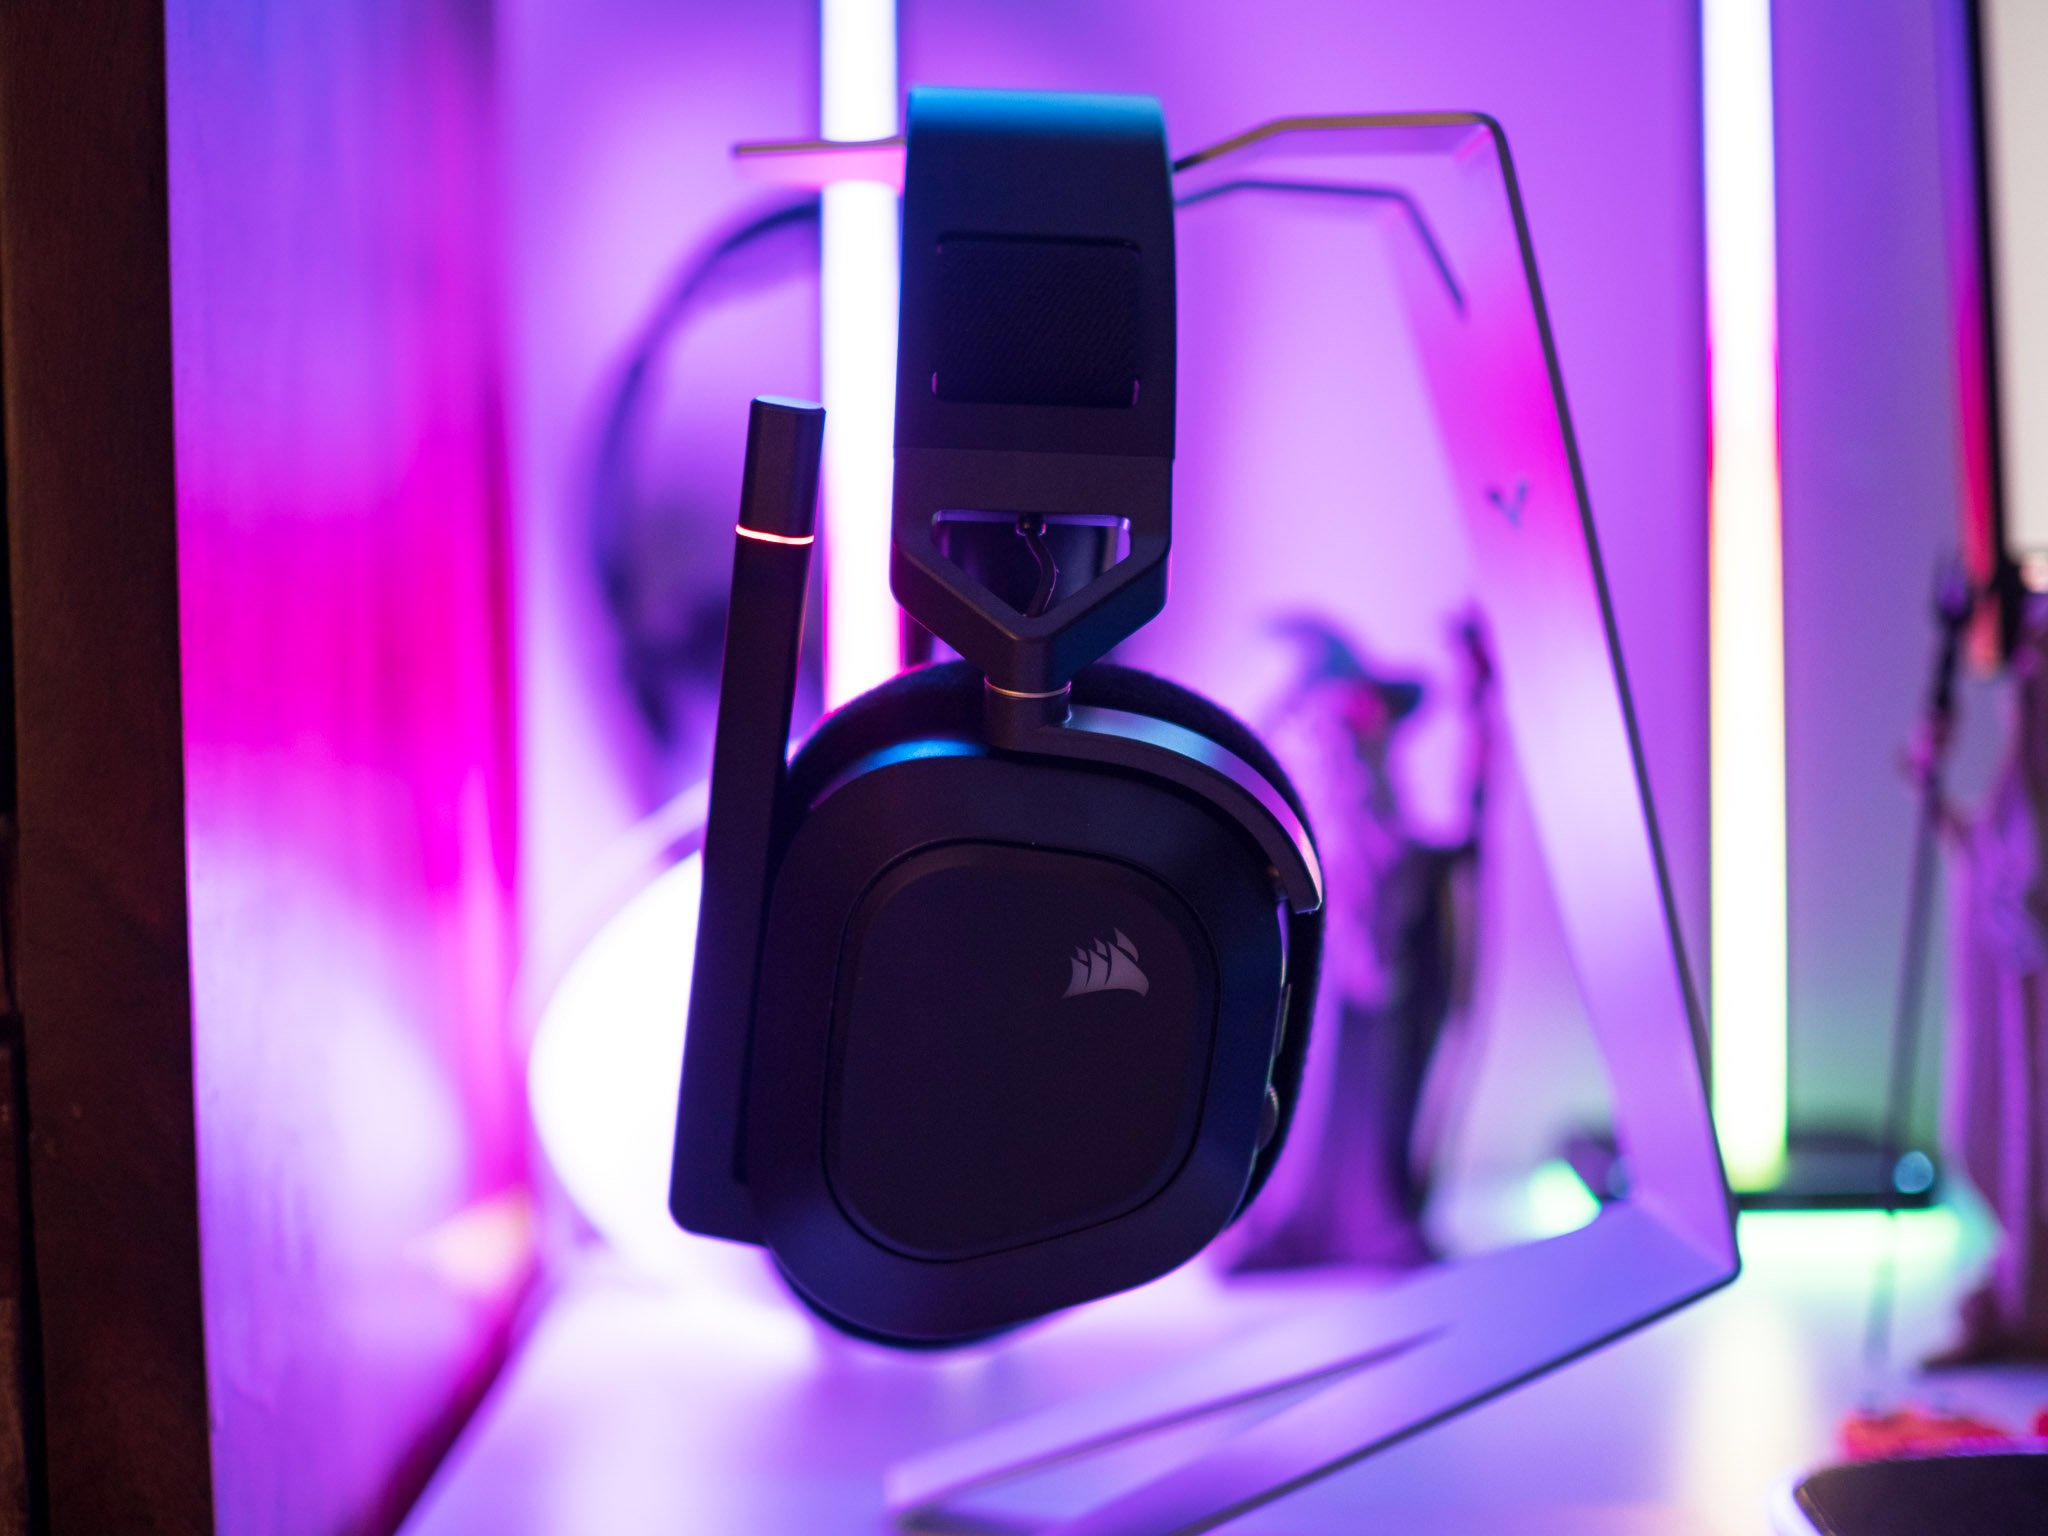 most yet review: PS5 Android comfortable headset Wireless HS80 | The Corsair RGB Central